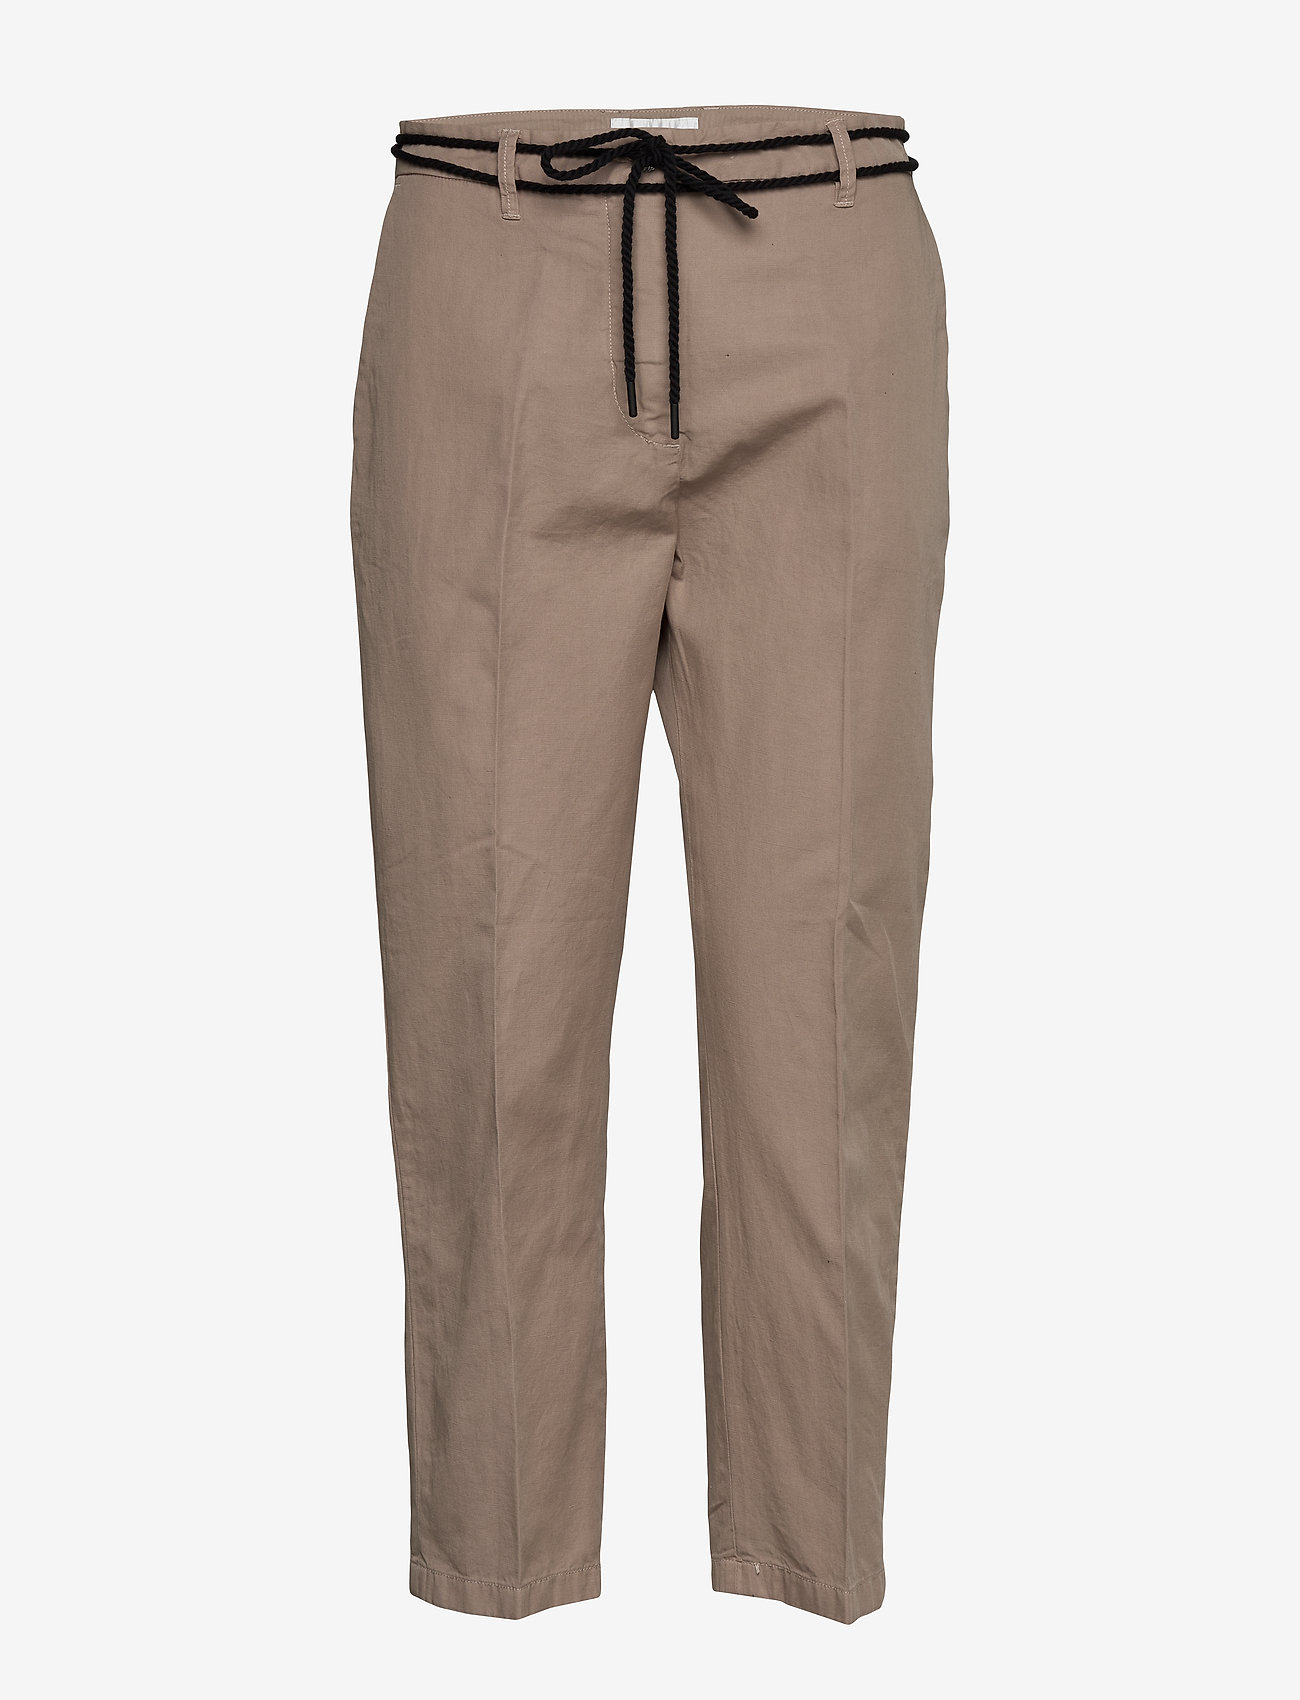 Replay - Trousers - straight leg trousers - beige - 0